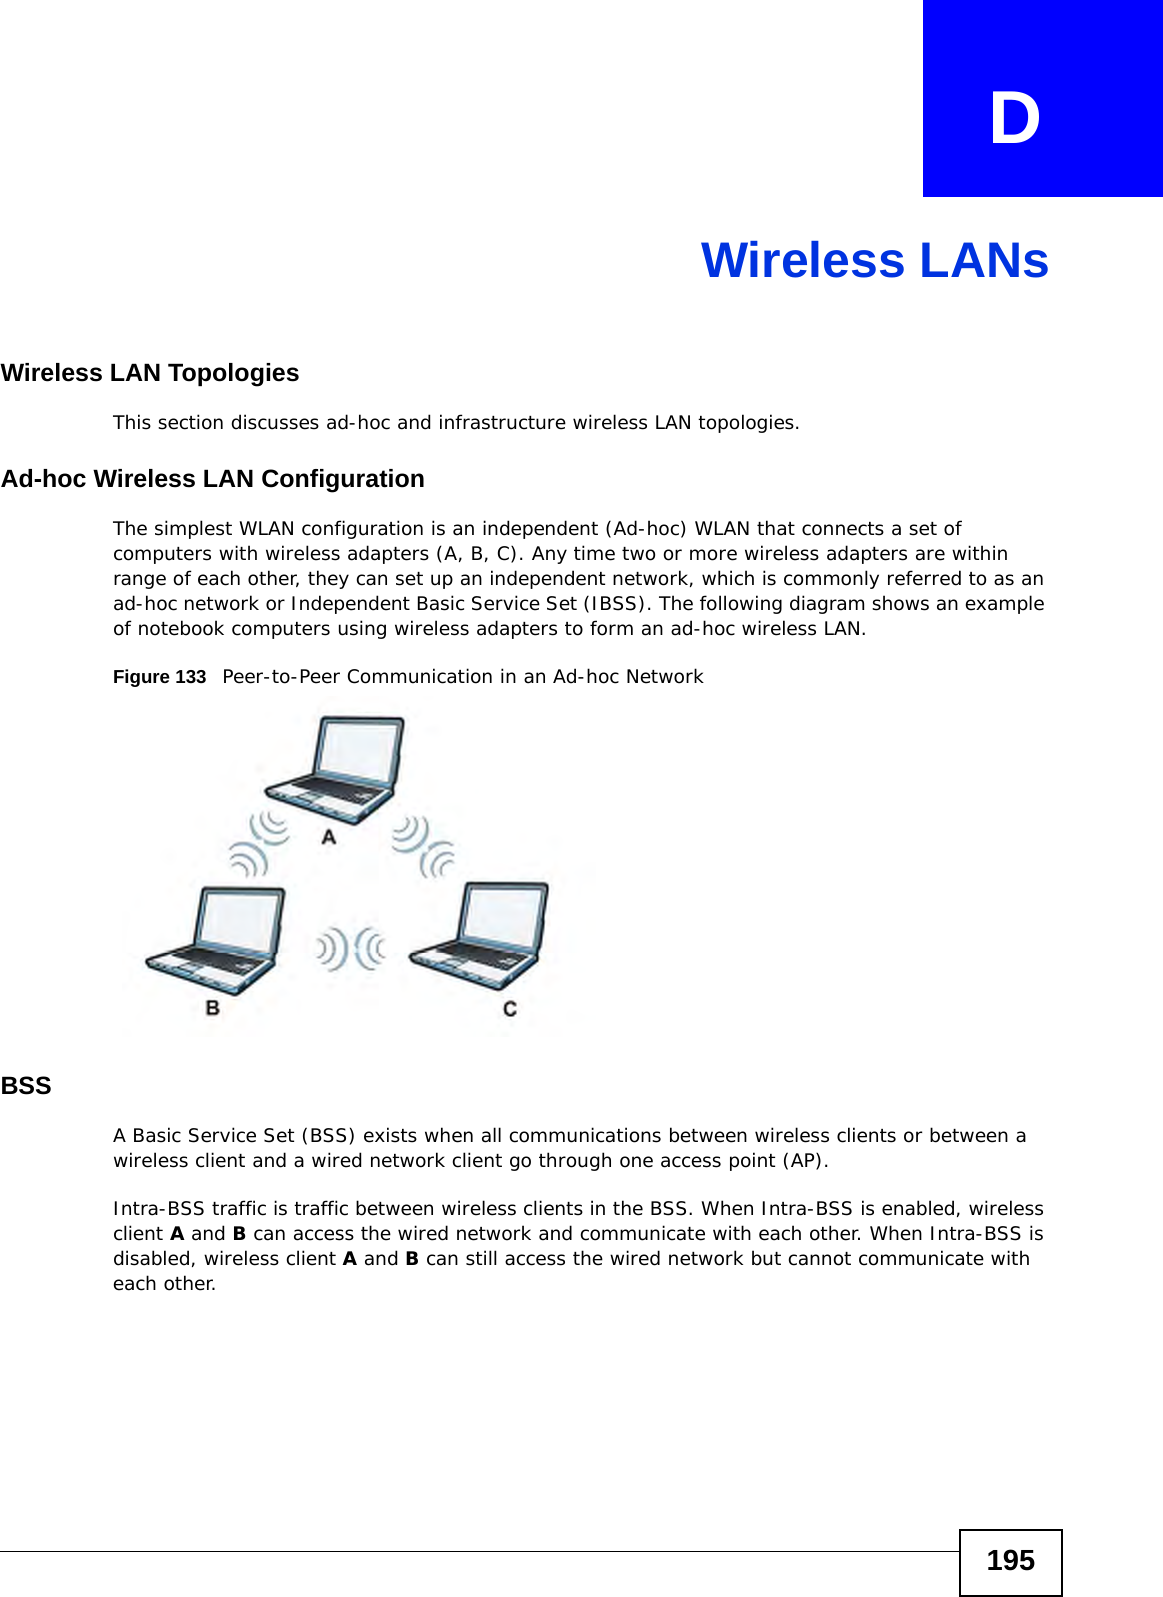 195APPENDIX   DWireless LANsWireless LAN TopologiesThis section discusses ad-hoc and infrastructure wireless LAN topologies.Ad-hoc Wireless LAN ConfigurationThe simplest WLAN configuration is an independent (Ad-hoc) WLAN that connects a set of computers with wireless adapters (A, B, C). Any time two or more wireless adapters are within range of each other, they can set up an independent network, which is commonly referred to as an ad-hoc network or Independent Basic Service Set (IBSS). The following diagram shows an example of notebook computers using wireless adapters to form an ad-hoc wireless LAN. Figure 133   Peer-to-Peer Communication in an Ad-hoc NetworkBSSA Basic Service Set (BSS) exists when all communications between wireless clients or between a wireless client and a wired network client go through one access point (AP). Intra-BSS traffic is traffic between wireless clients in the BSS. When Intra-BSS is enabled, wireless client A and B can access the wired network and communicate with each other. When Intra-BSS is disabled, wireless client A and B can still access the wired network but cannot communicate with each other.